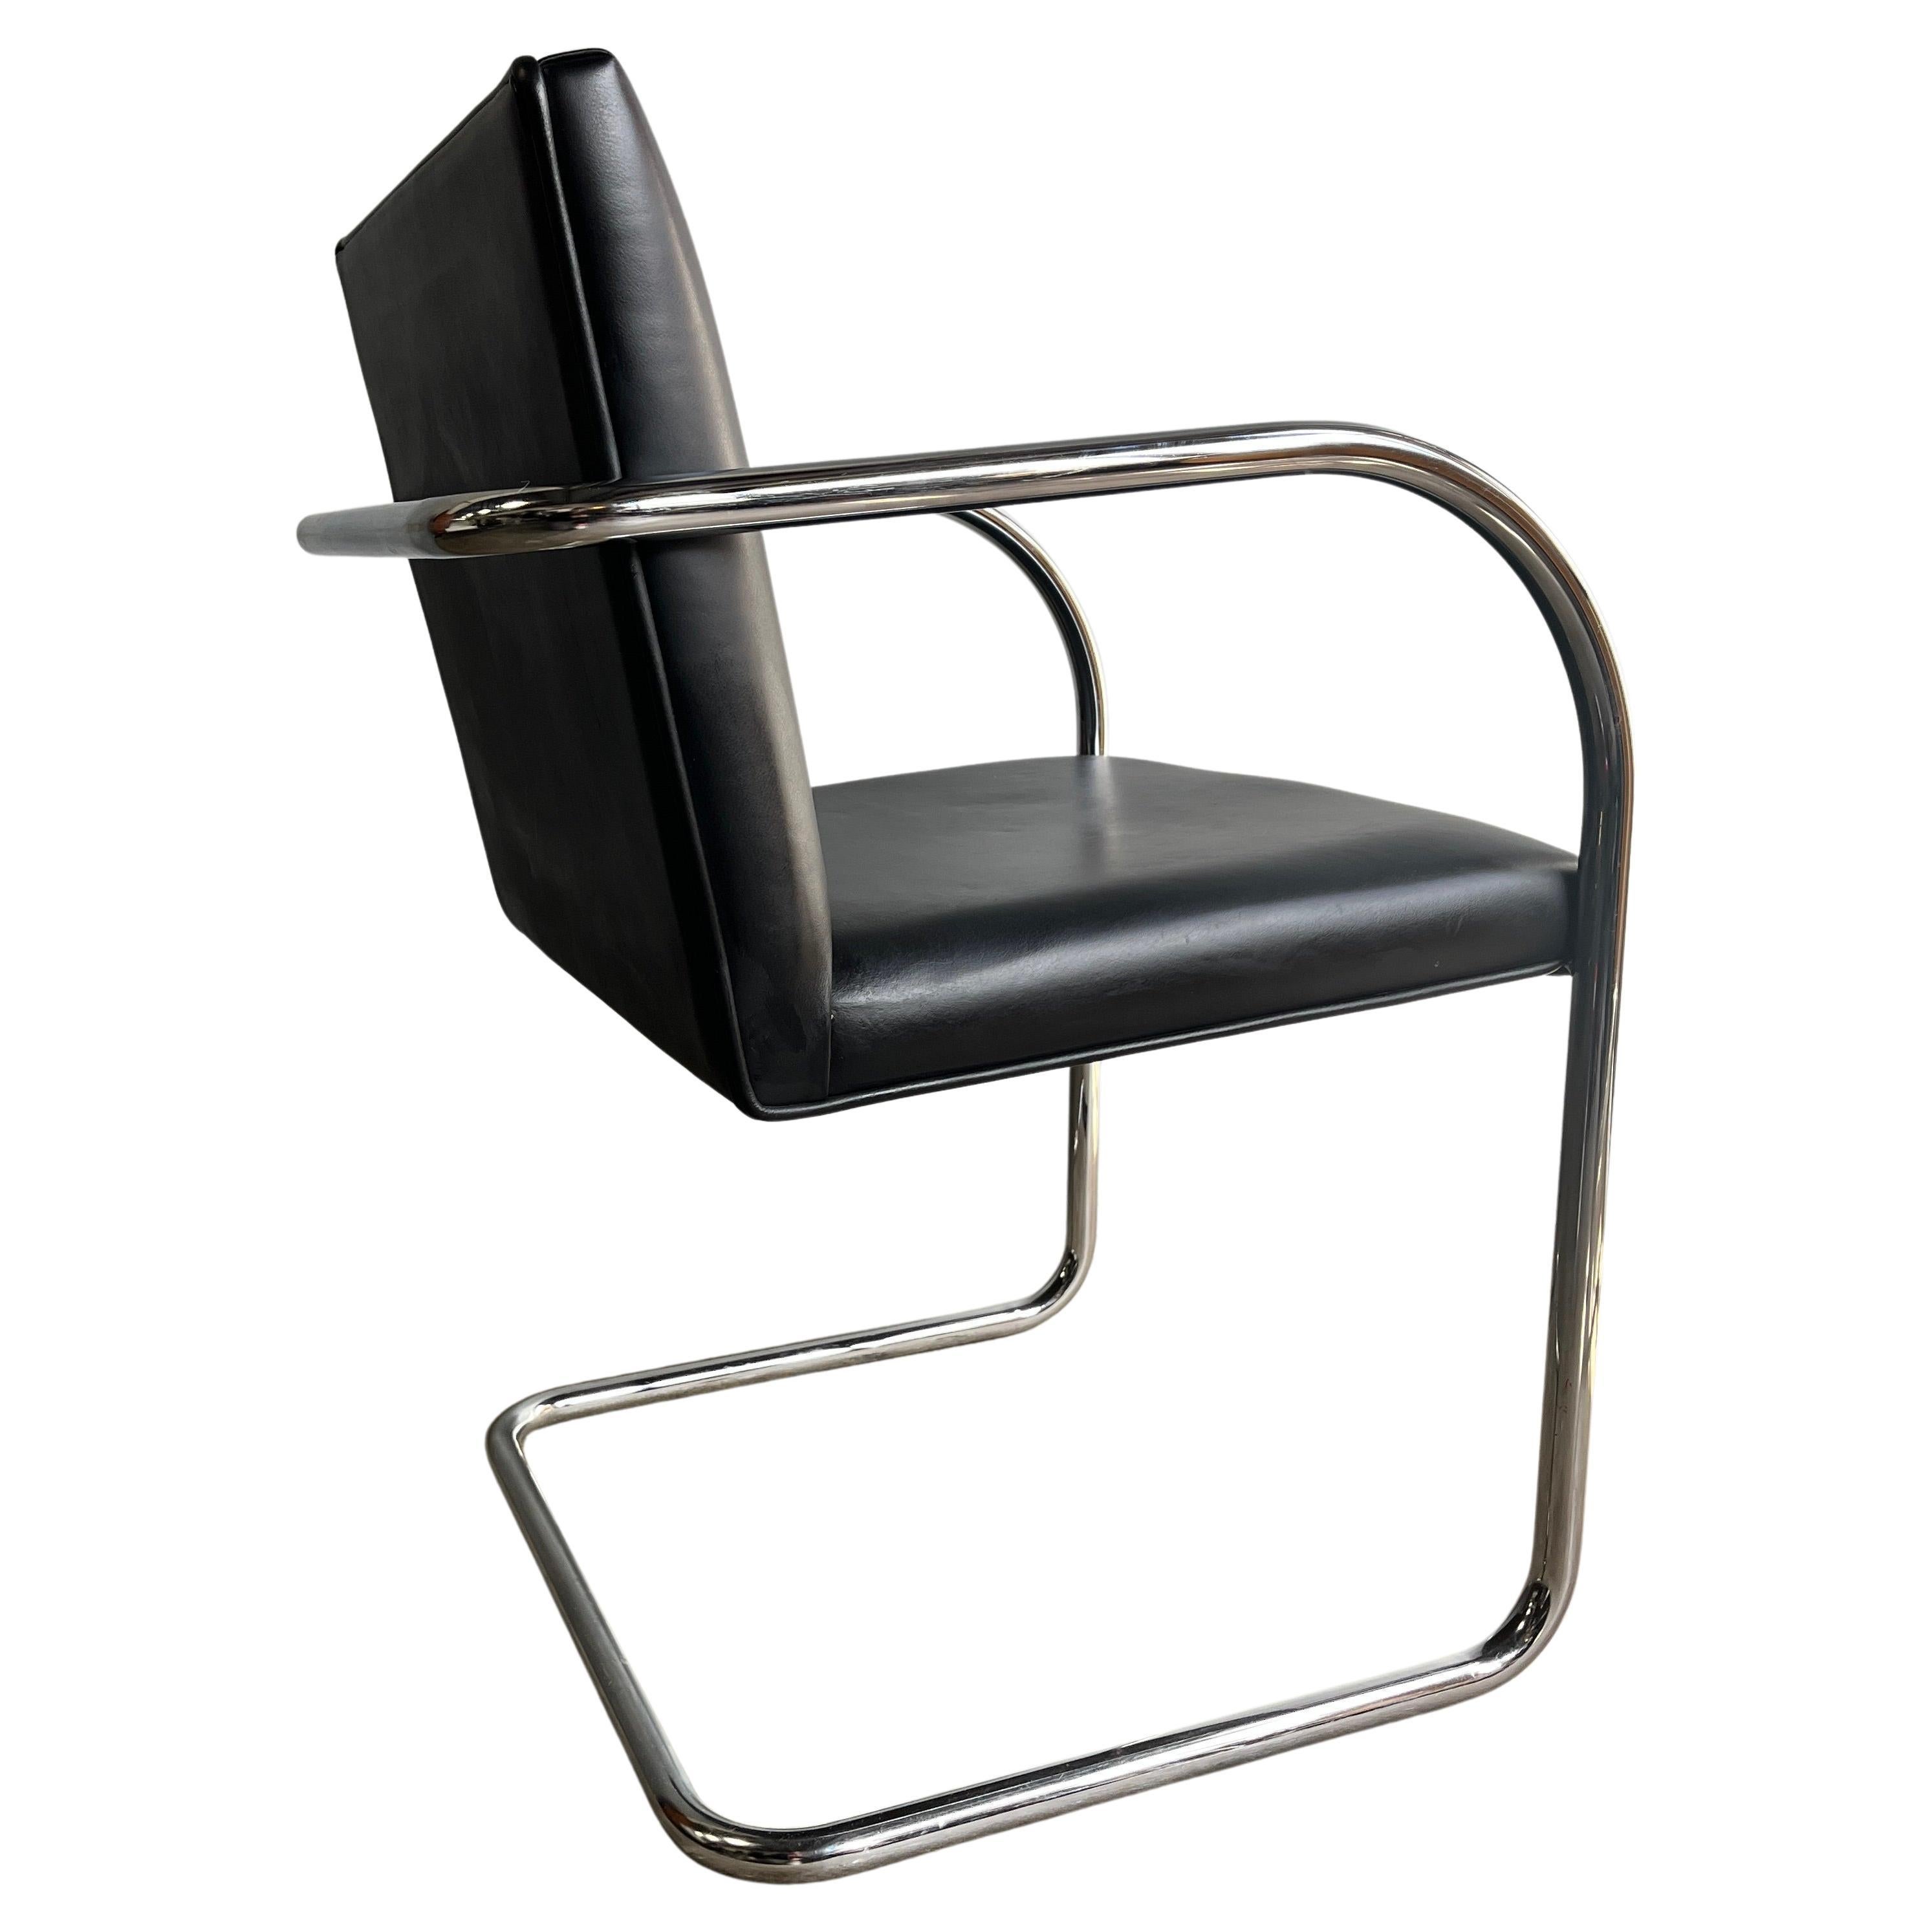 Midcentury Knoll Brno Chair by Mies Van Der Rohe